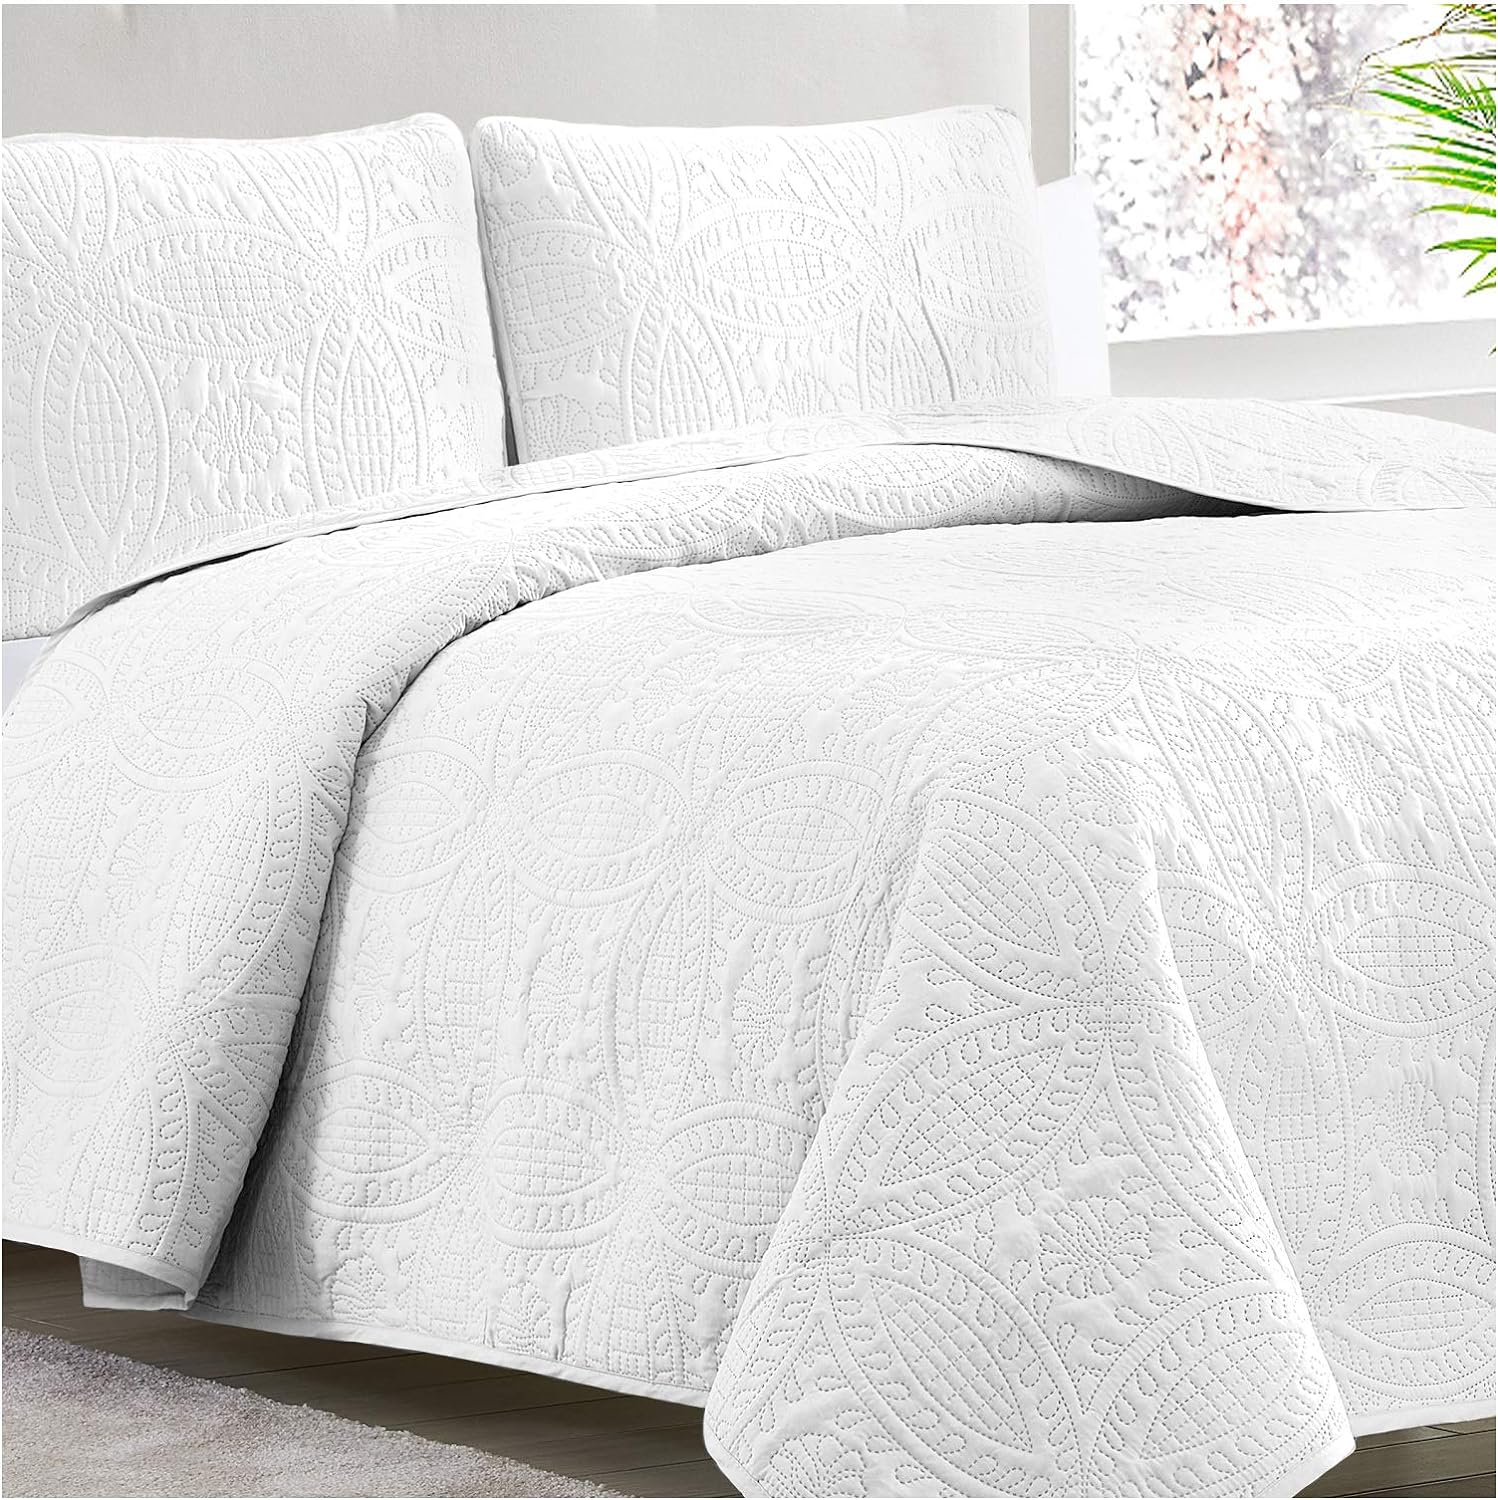 Mellanni Bedspread Coverlet Set - White Bedding Cover with Shams - Ultrasonic Quilting Technology - 3 Piece Oversized White Quilt King Size Set - Bedspreads & Coverlets (King, White) 